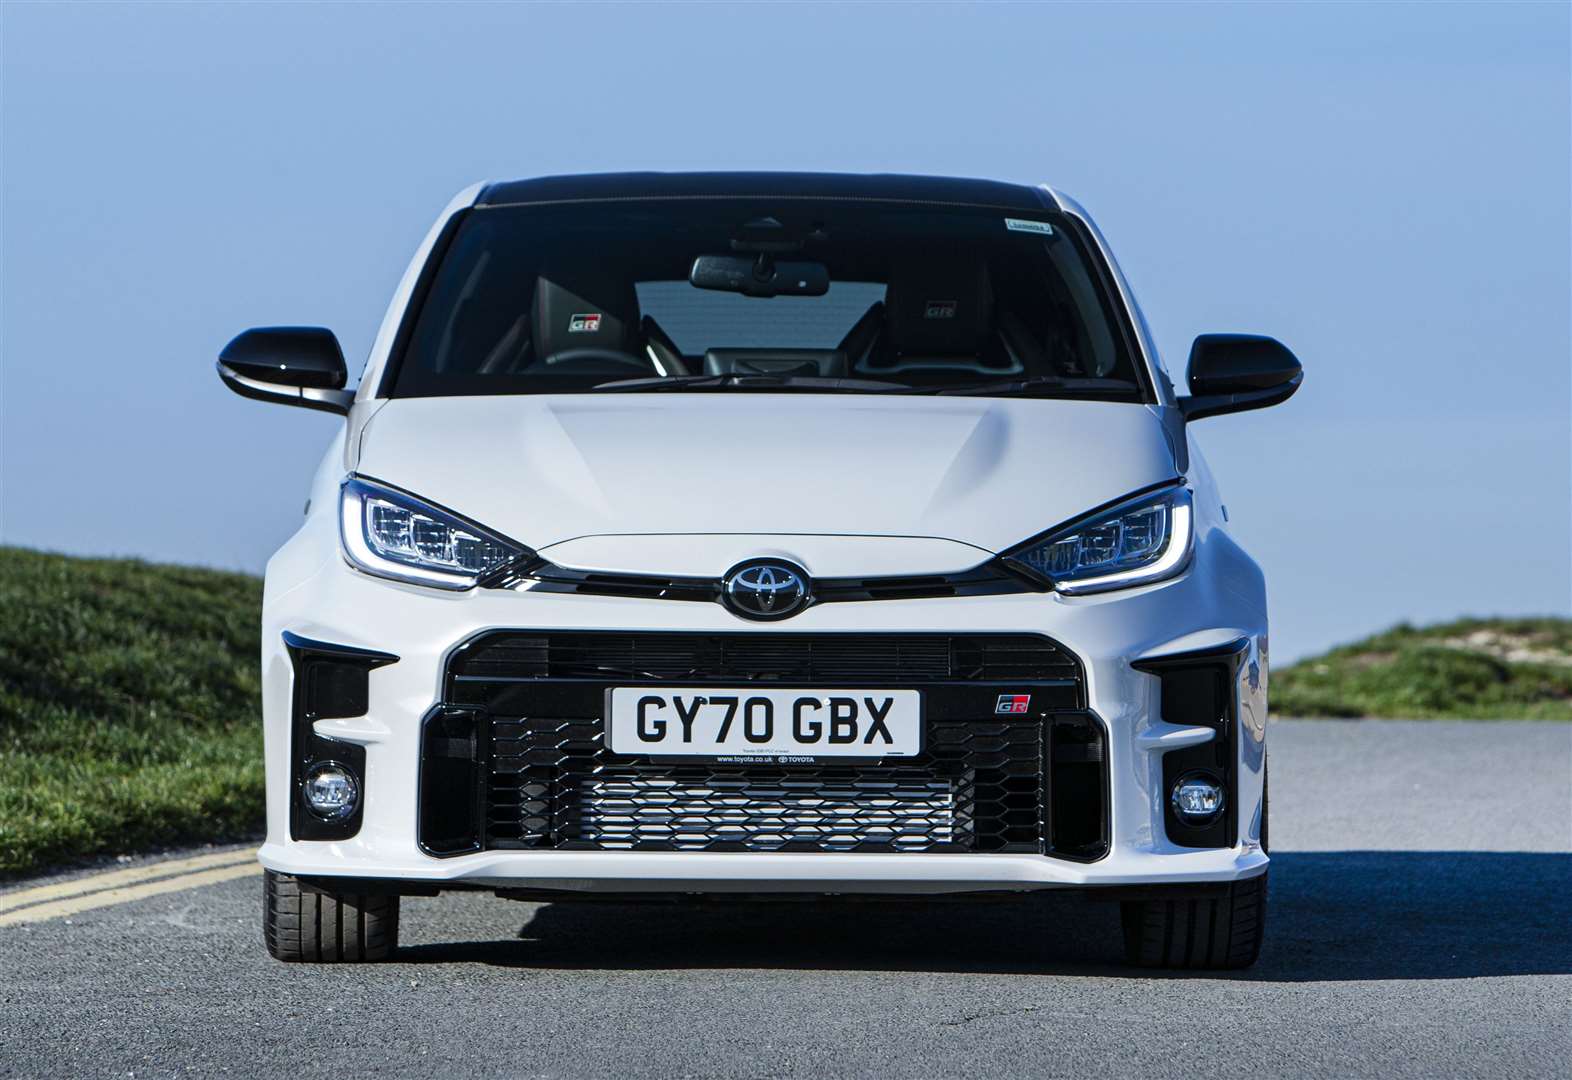 Ask the expert: 'Why is the high-performance Toyota GR Yaris so expensive?